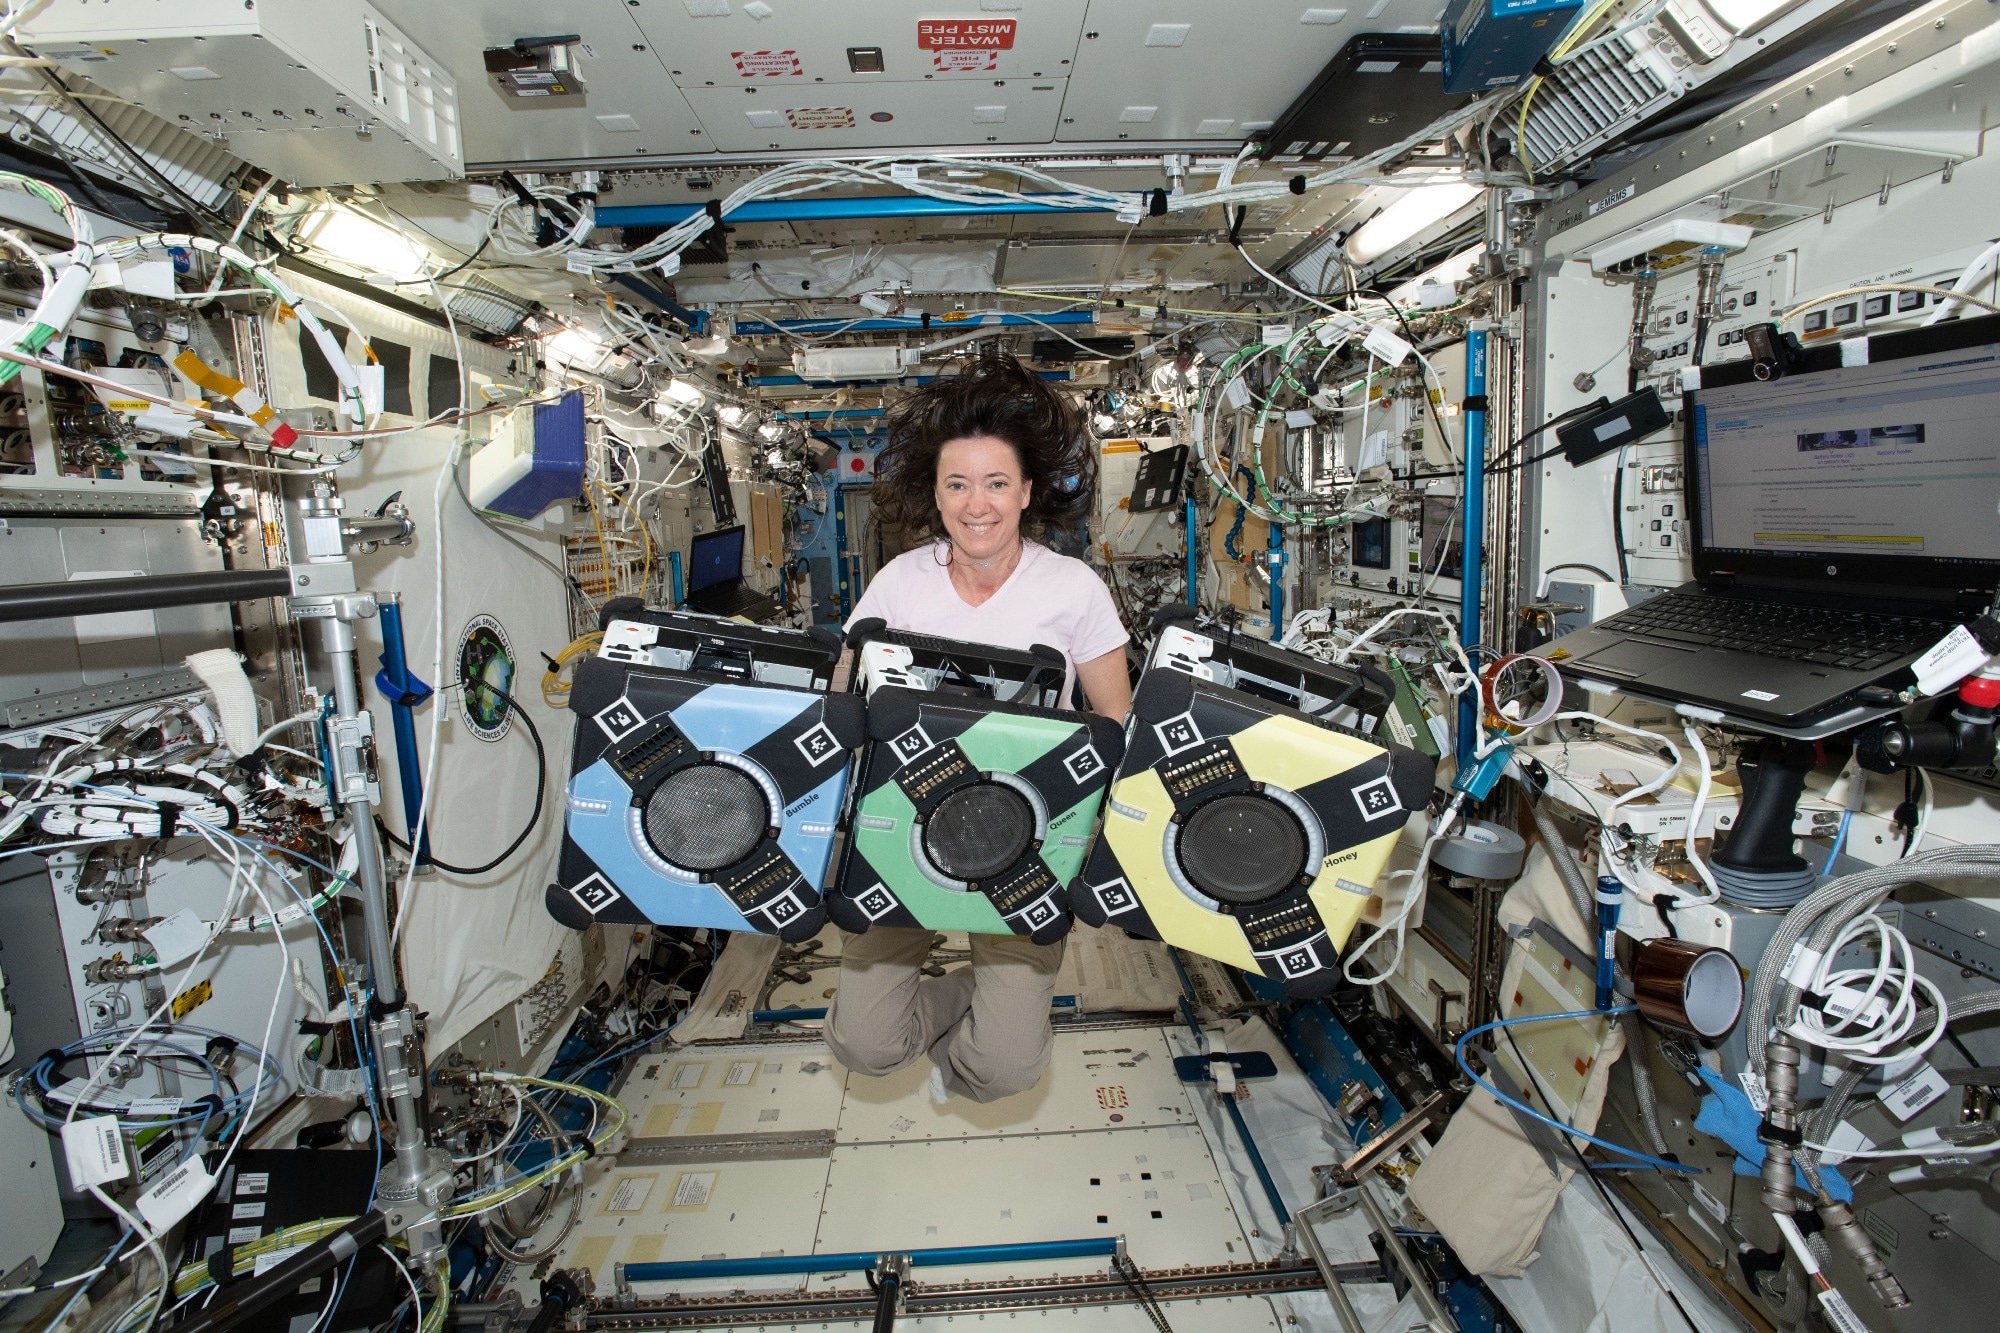 Robotic Helpers Test New Technology on the Space Station